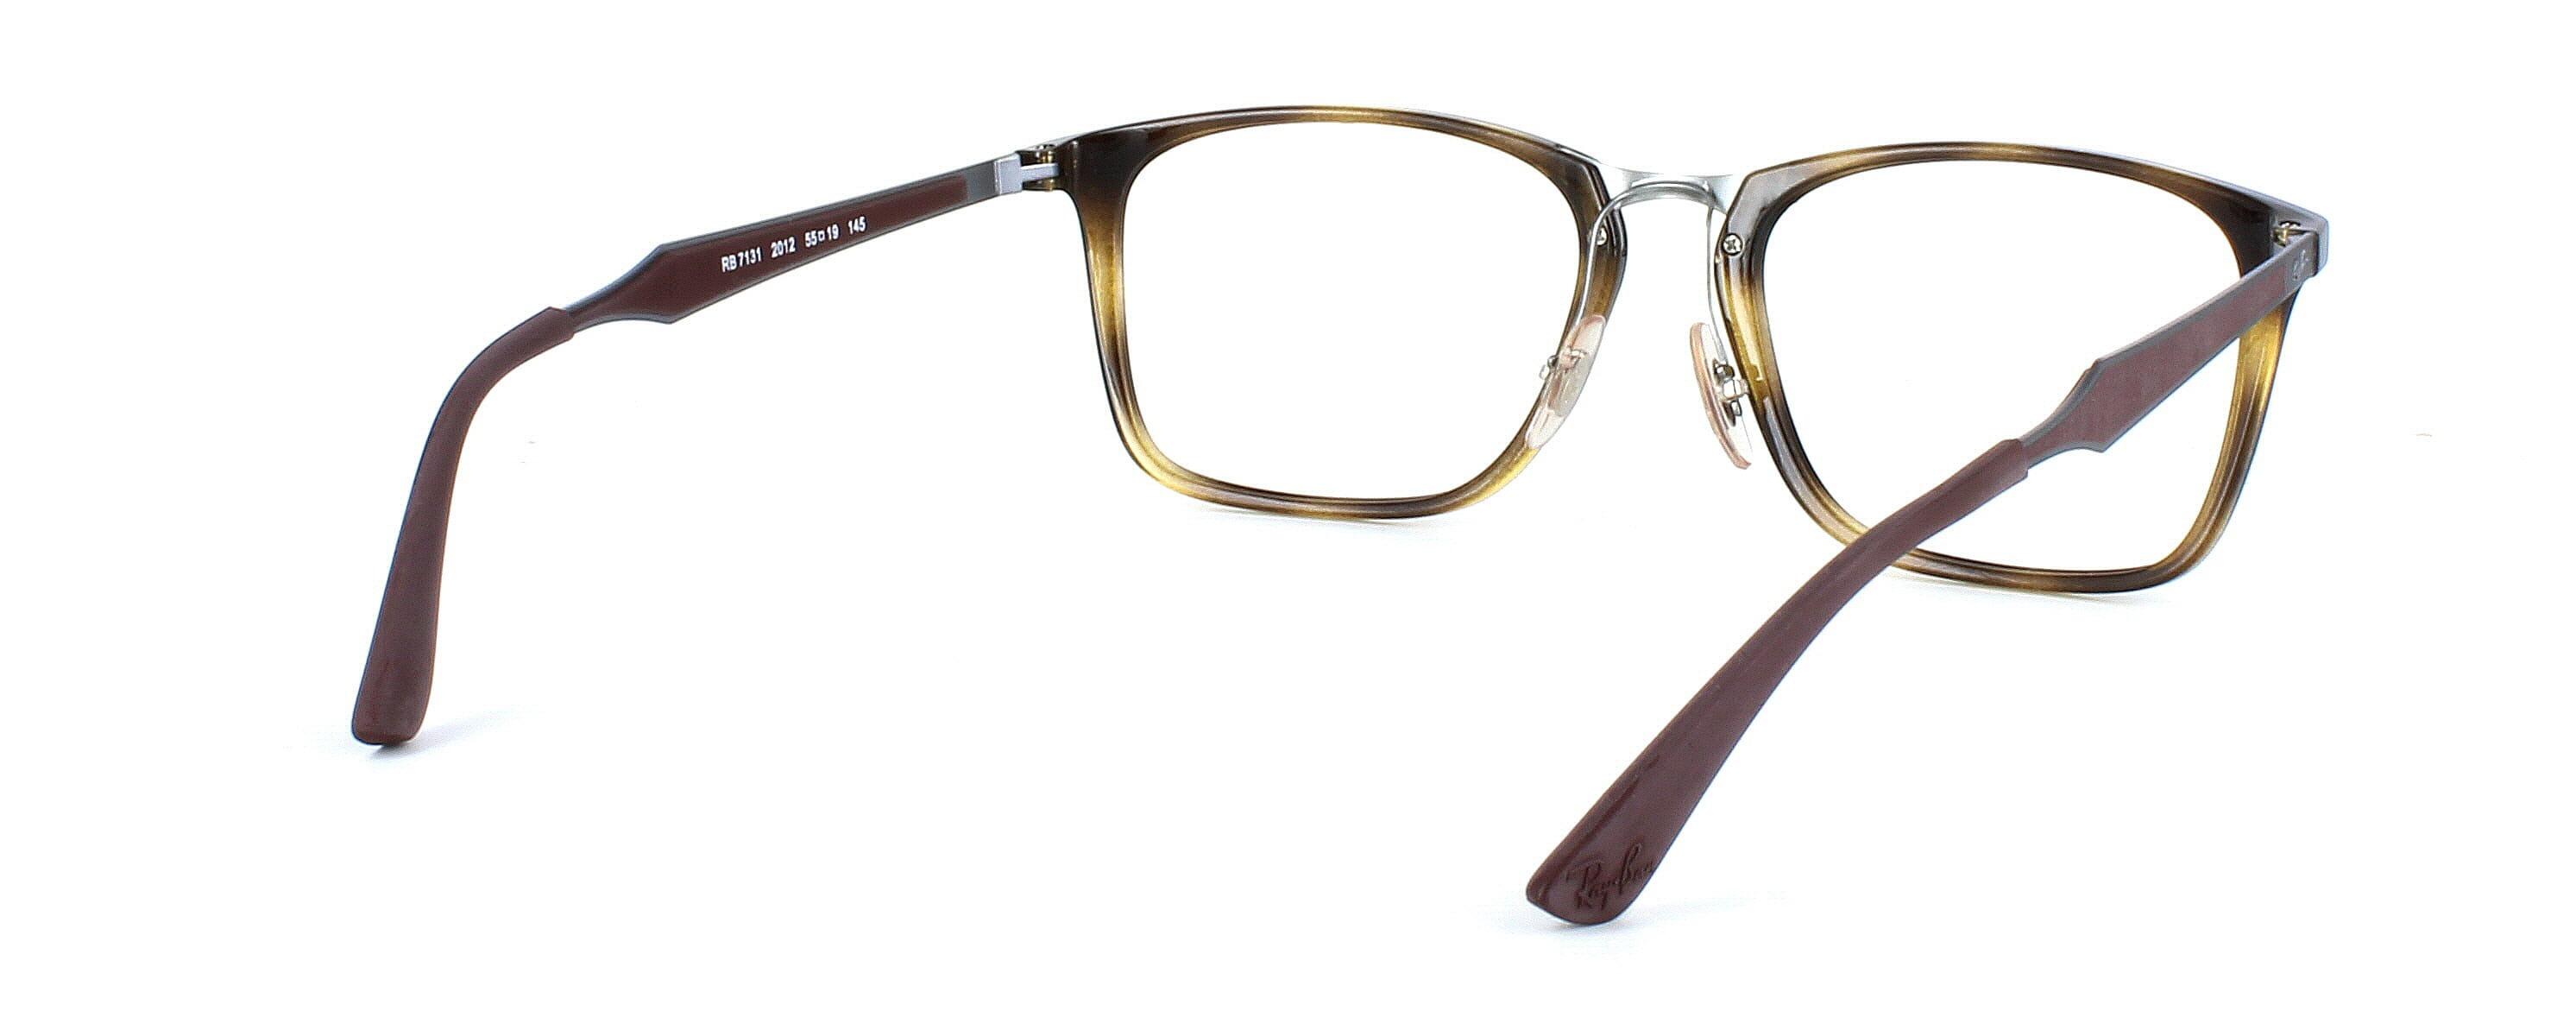 Ray Ban 7131 - Gent's tortoise acetate with metal nose bridge - image view 5